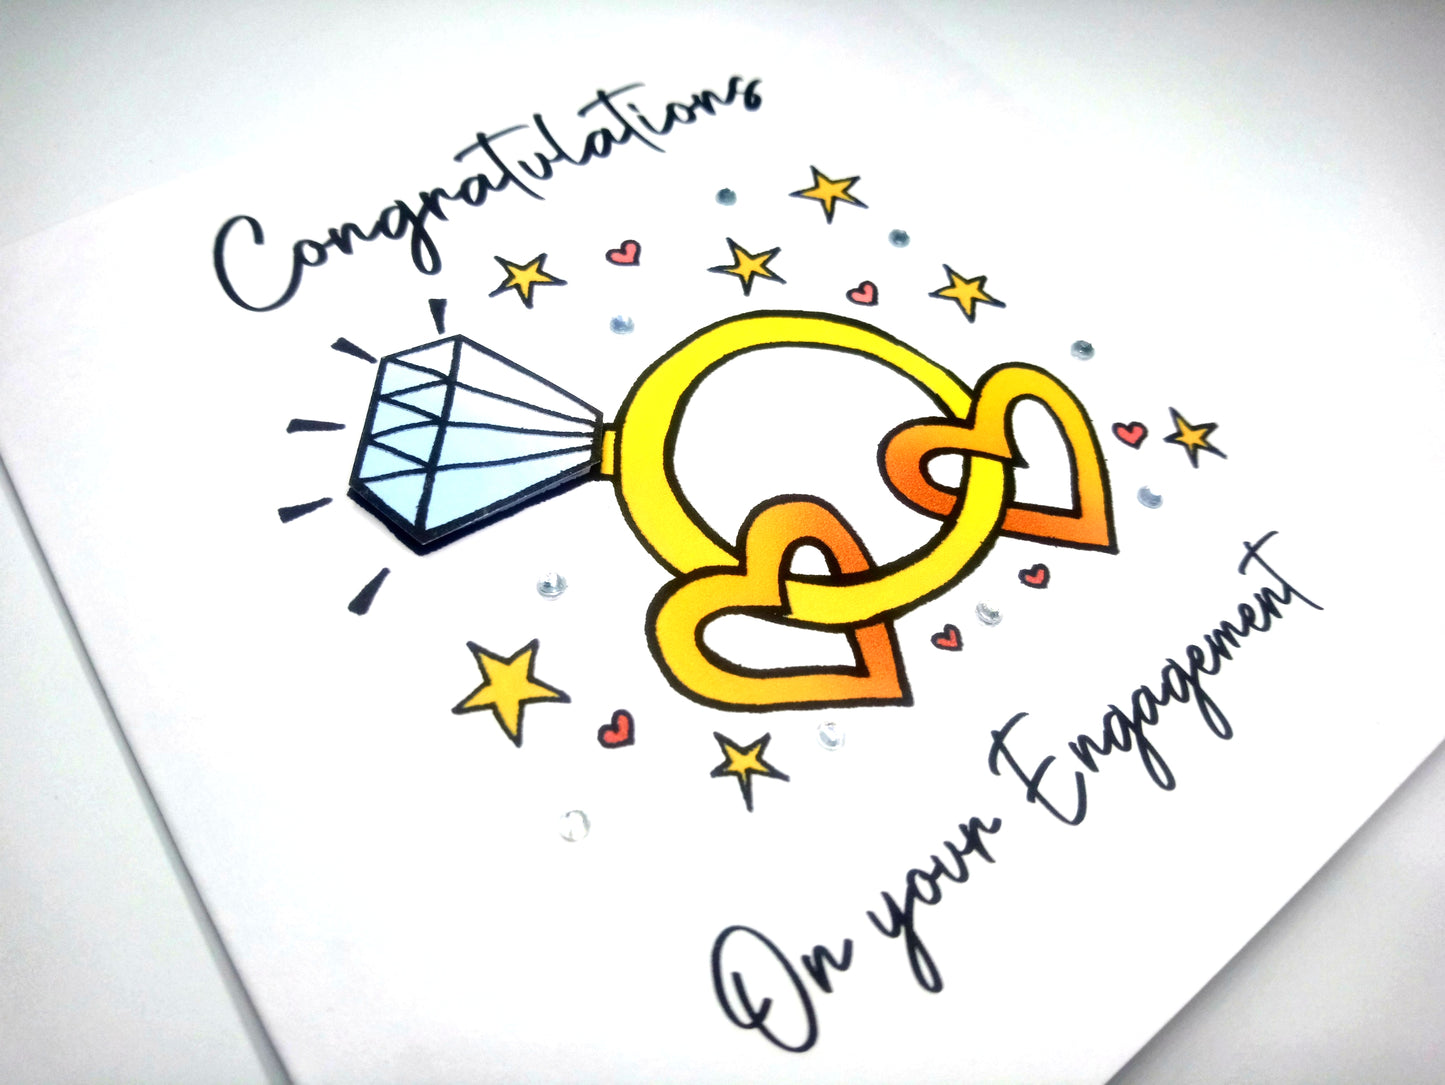 Congratulations on your Engagement Card